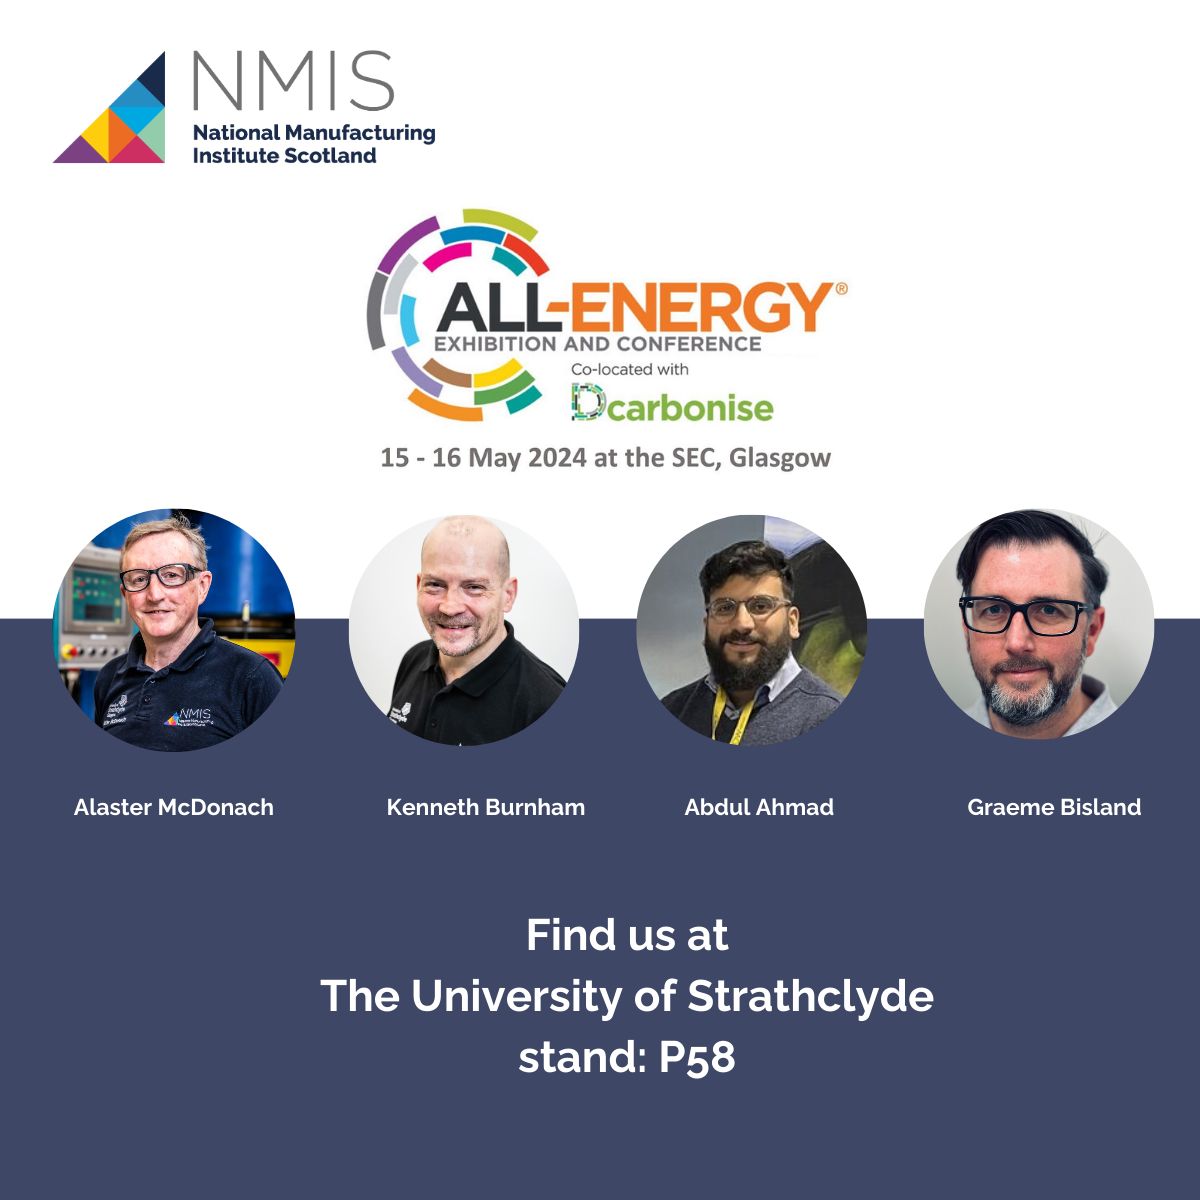 Join us at @AllEnergy nxt wk! 📆 15-16 May 📍 SEC, Glasgow Visit our stand with @UniStrathclyde & connect with the NMIS team. Plus, meet exhibitors inc @ScotRenew @PNDC_UK & more! Stay tuned for further updates coming soon. #RenewableEnergy #Innovation #NMISwind